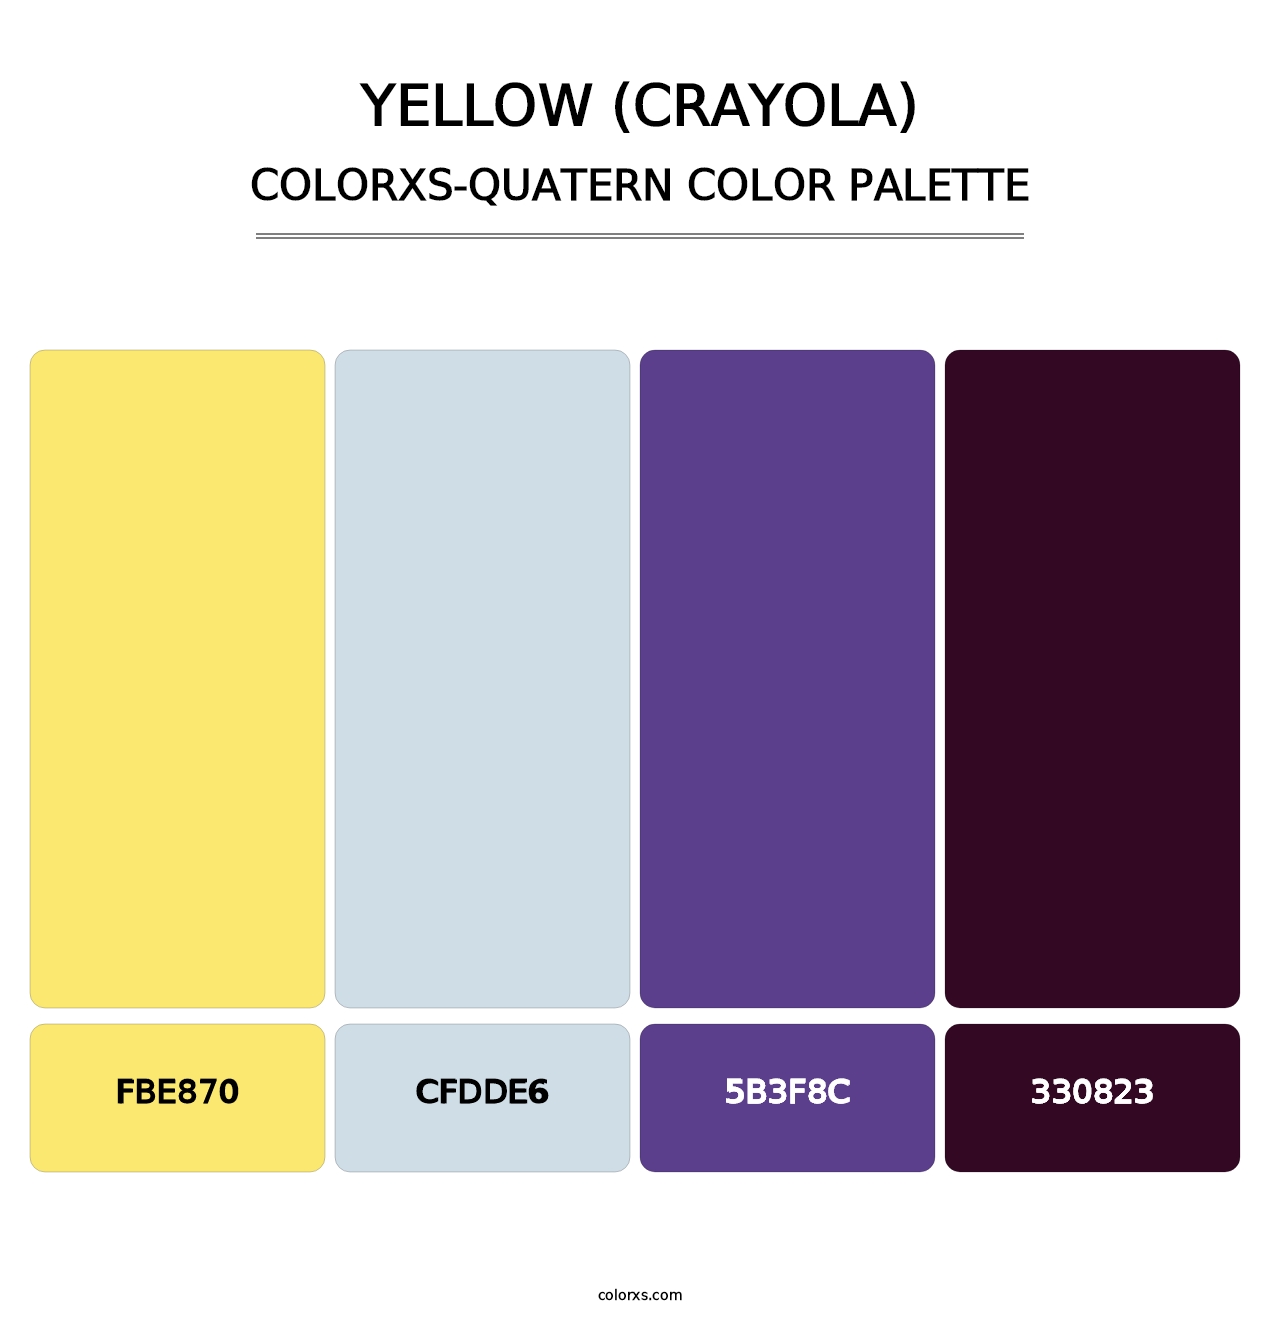 Yellow (Crayola) - Colorxs Quatern Palette